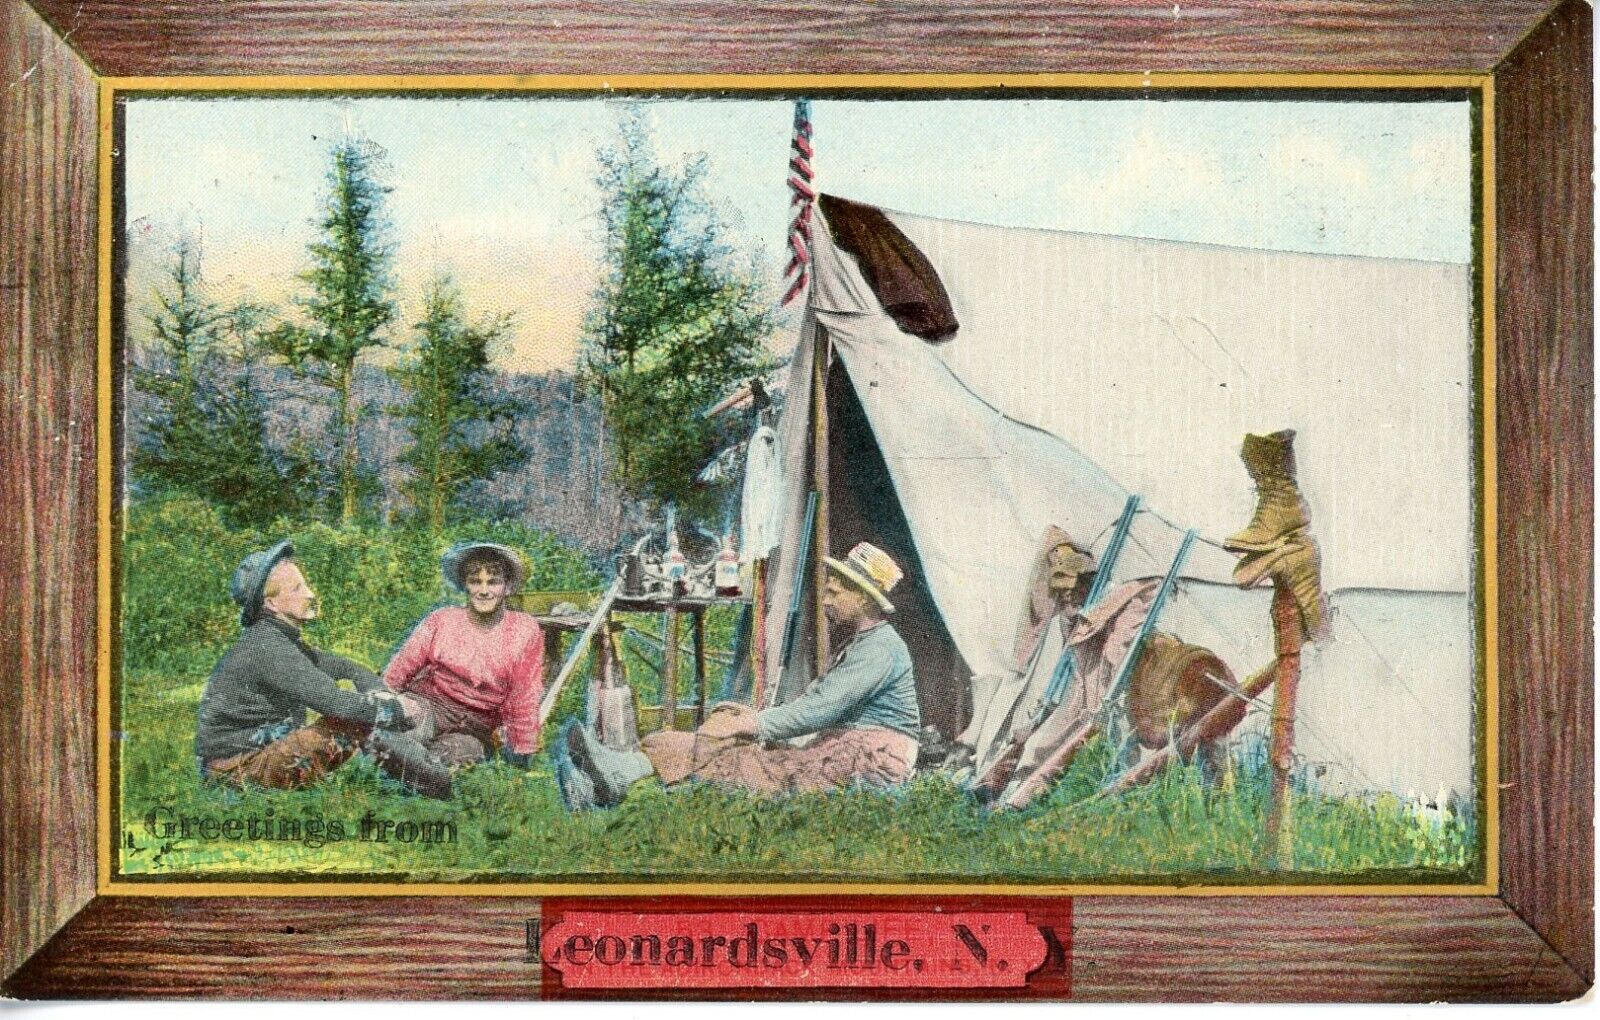 Postcard Leonardsville NY Pioneer Life Camping Divided Back Posted 1914 Antique 